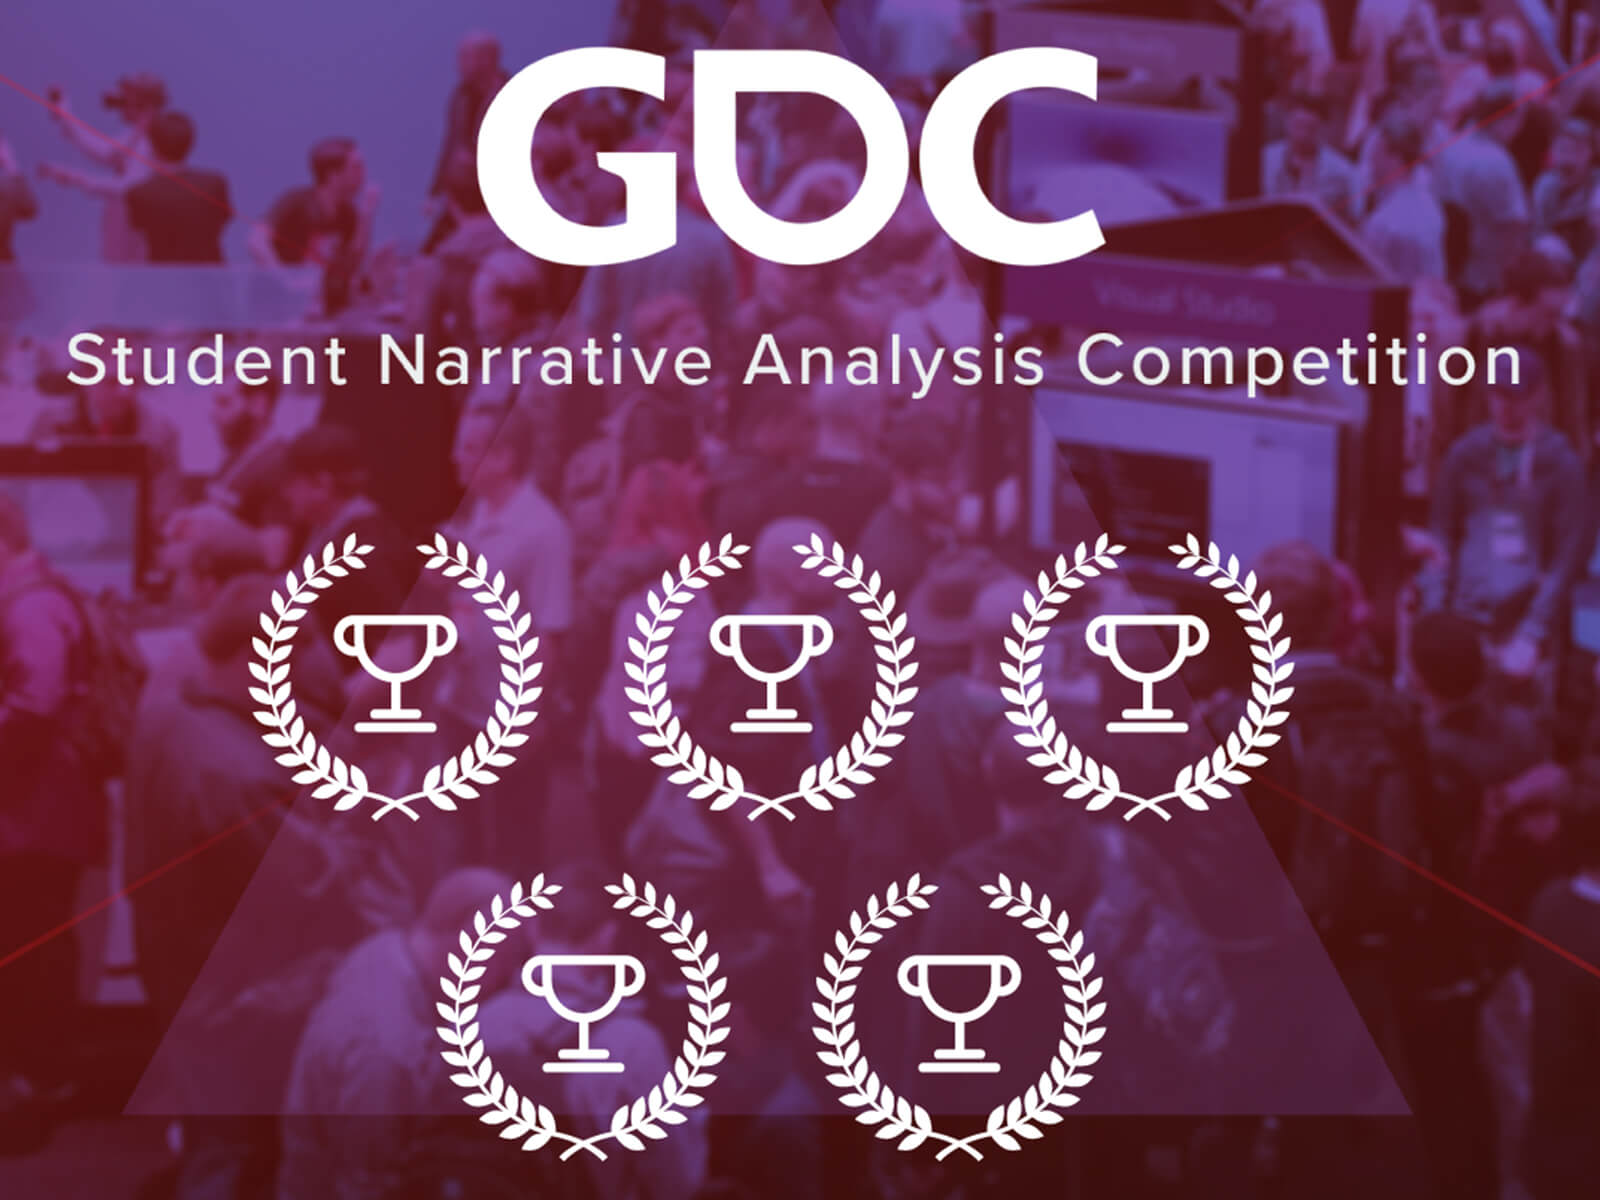 A scene from GDC with five award laurels on top and the words “GDC Student Narrative Analysis Competition.”